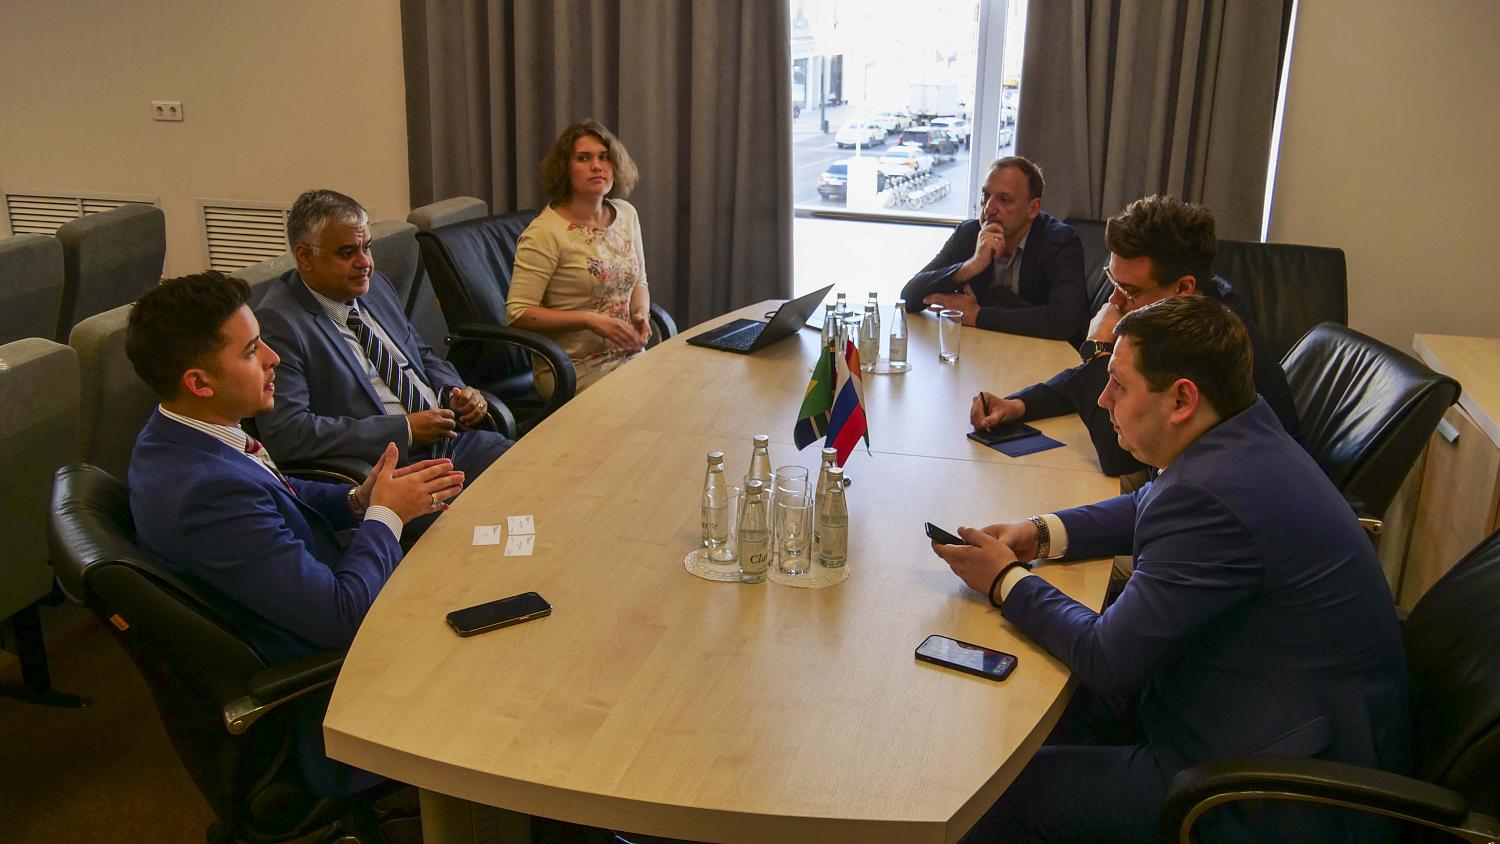 The official visit of a delegation from Brazil ended with business negotiations on a digital project